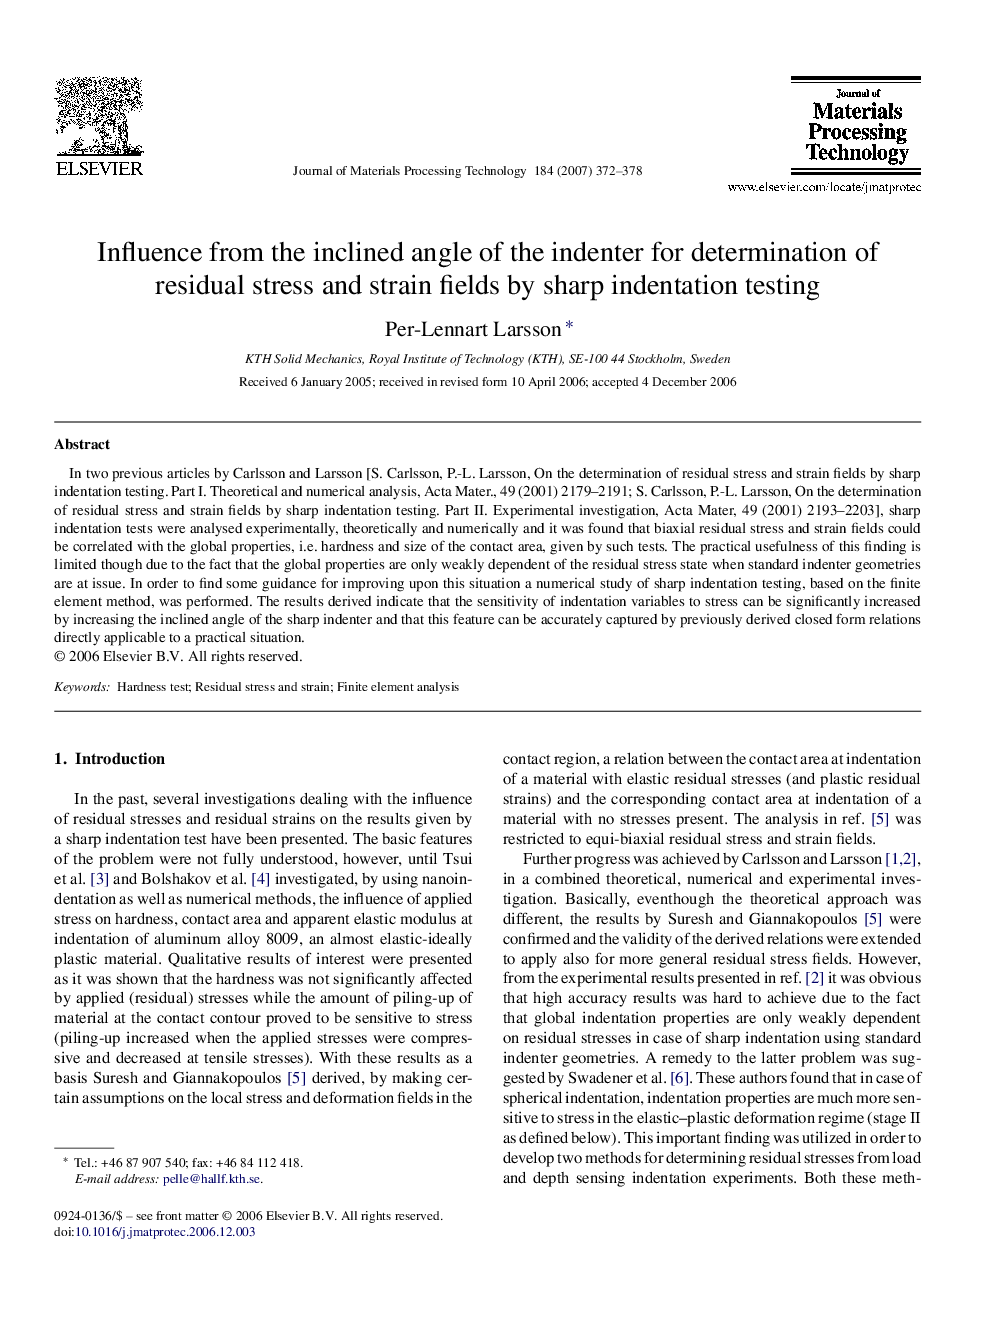 Influence from the inclined angle of the indenter for determination of residual stress and strain fields by sharp indentation testing